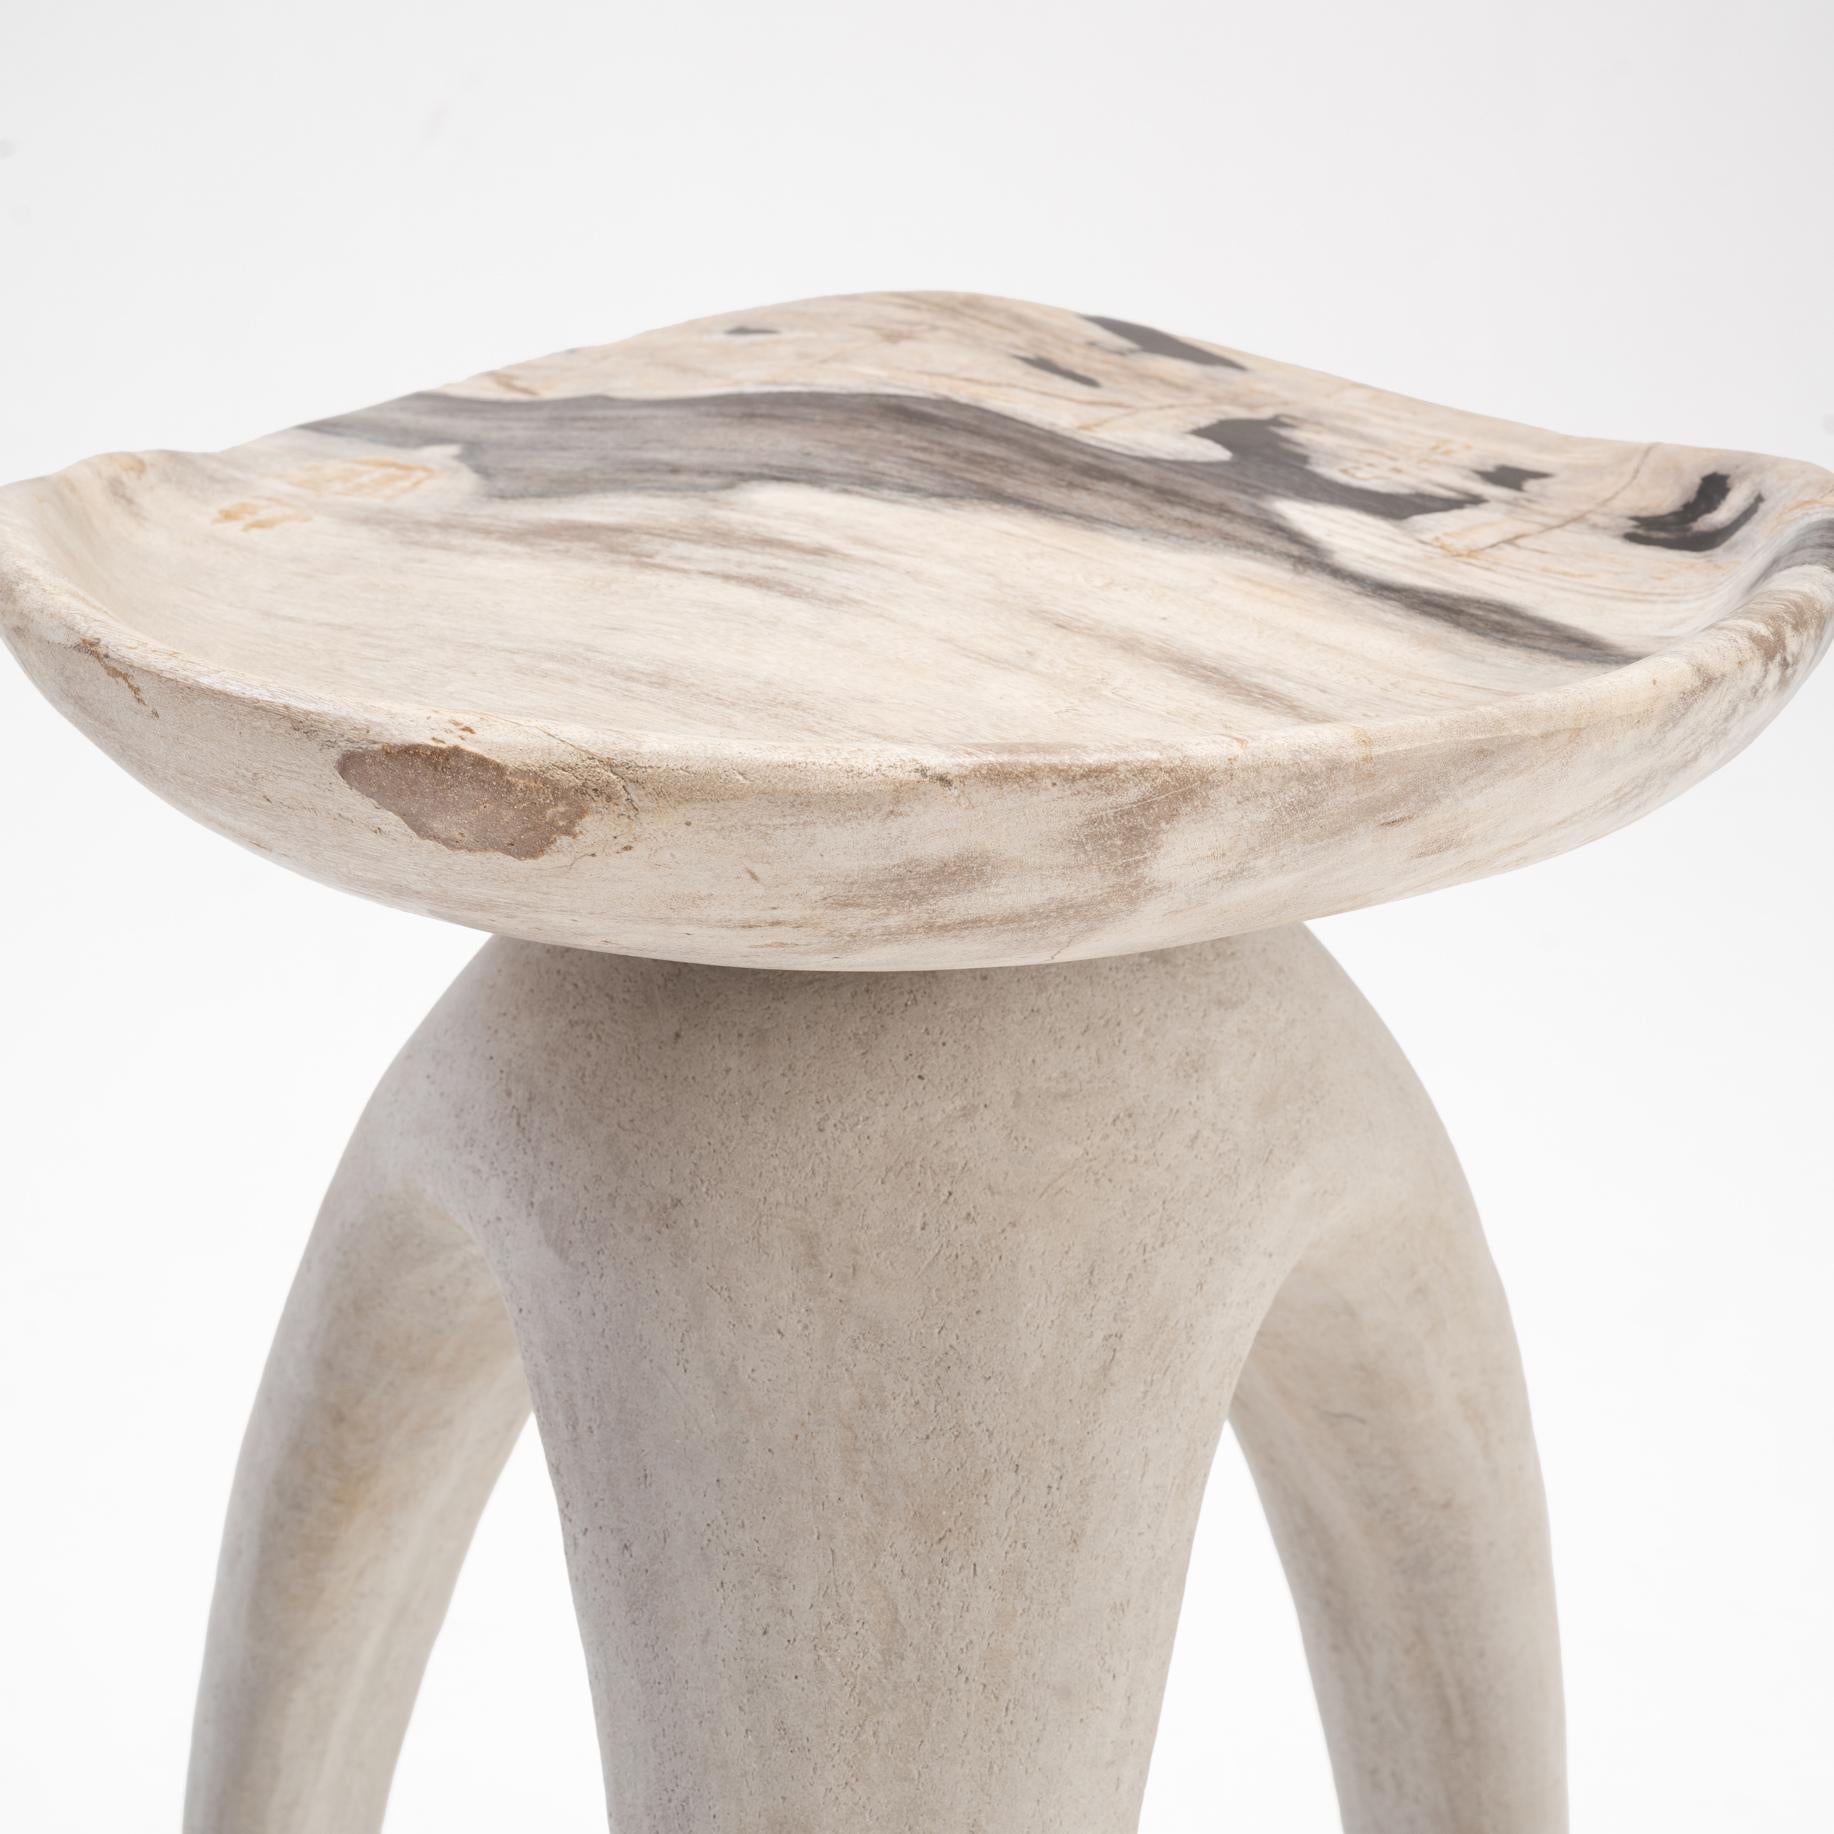 Australian Bermuda Love Triangle • Hand-Carved Solid Petrified Wood Stool by Odditi For Sale